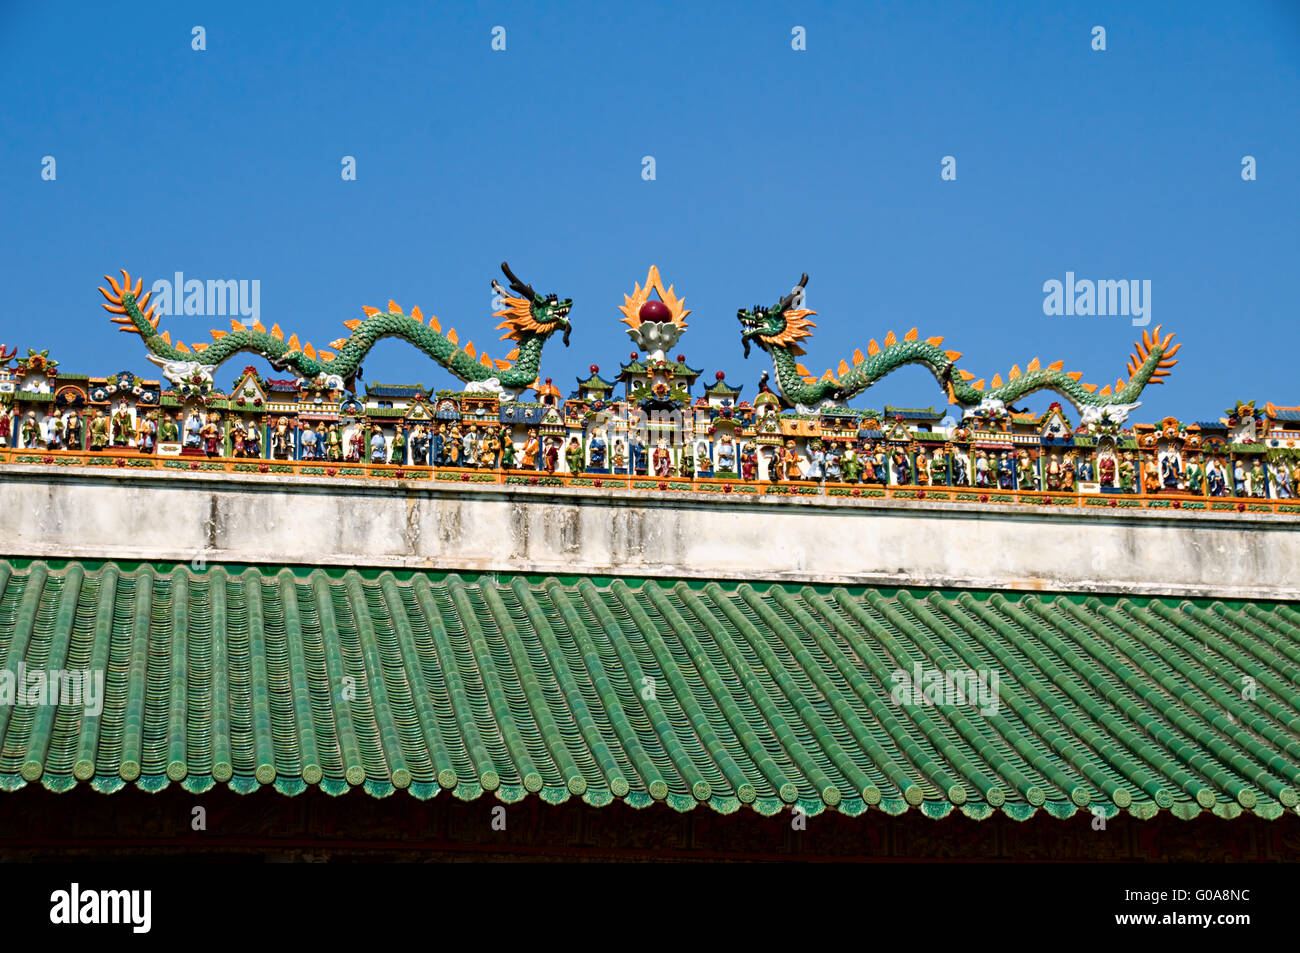 The carving of figurines on roof of Chinese temple Stock Photo